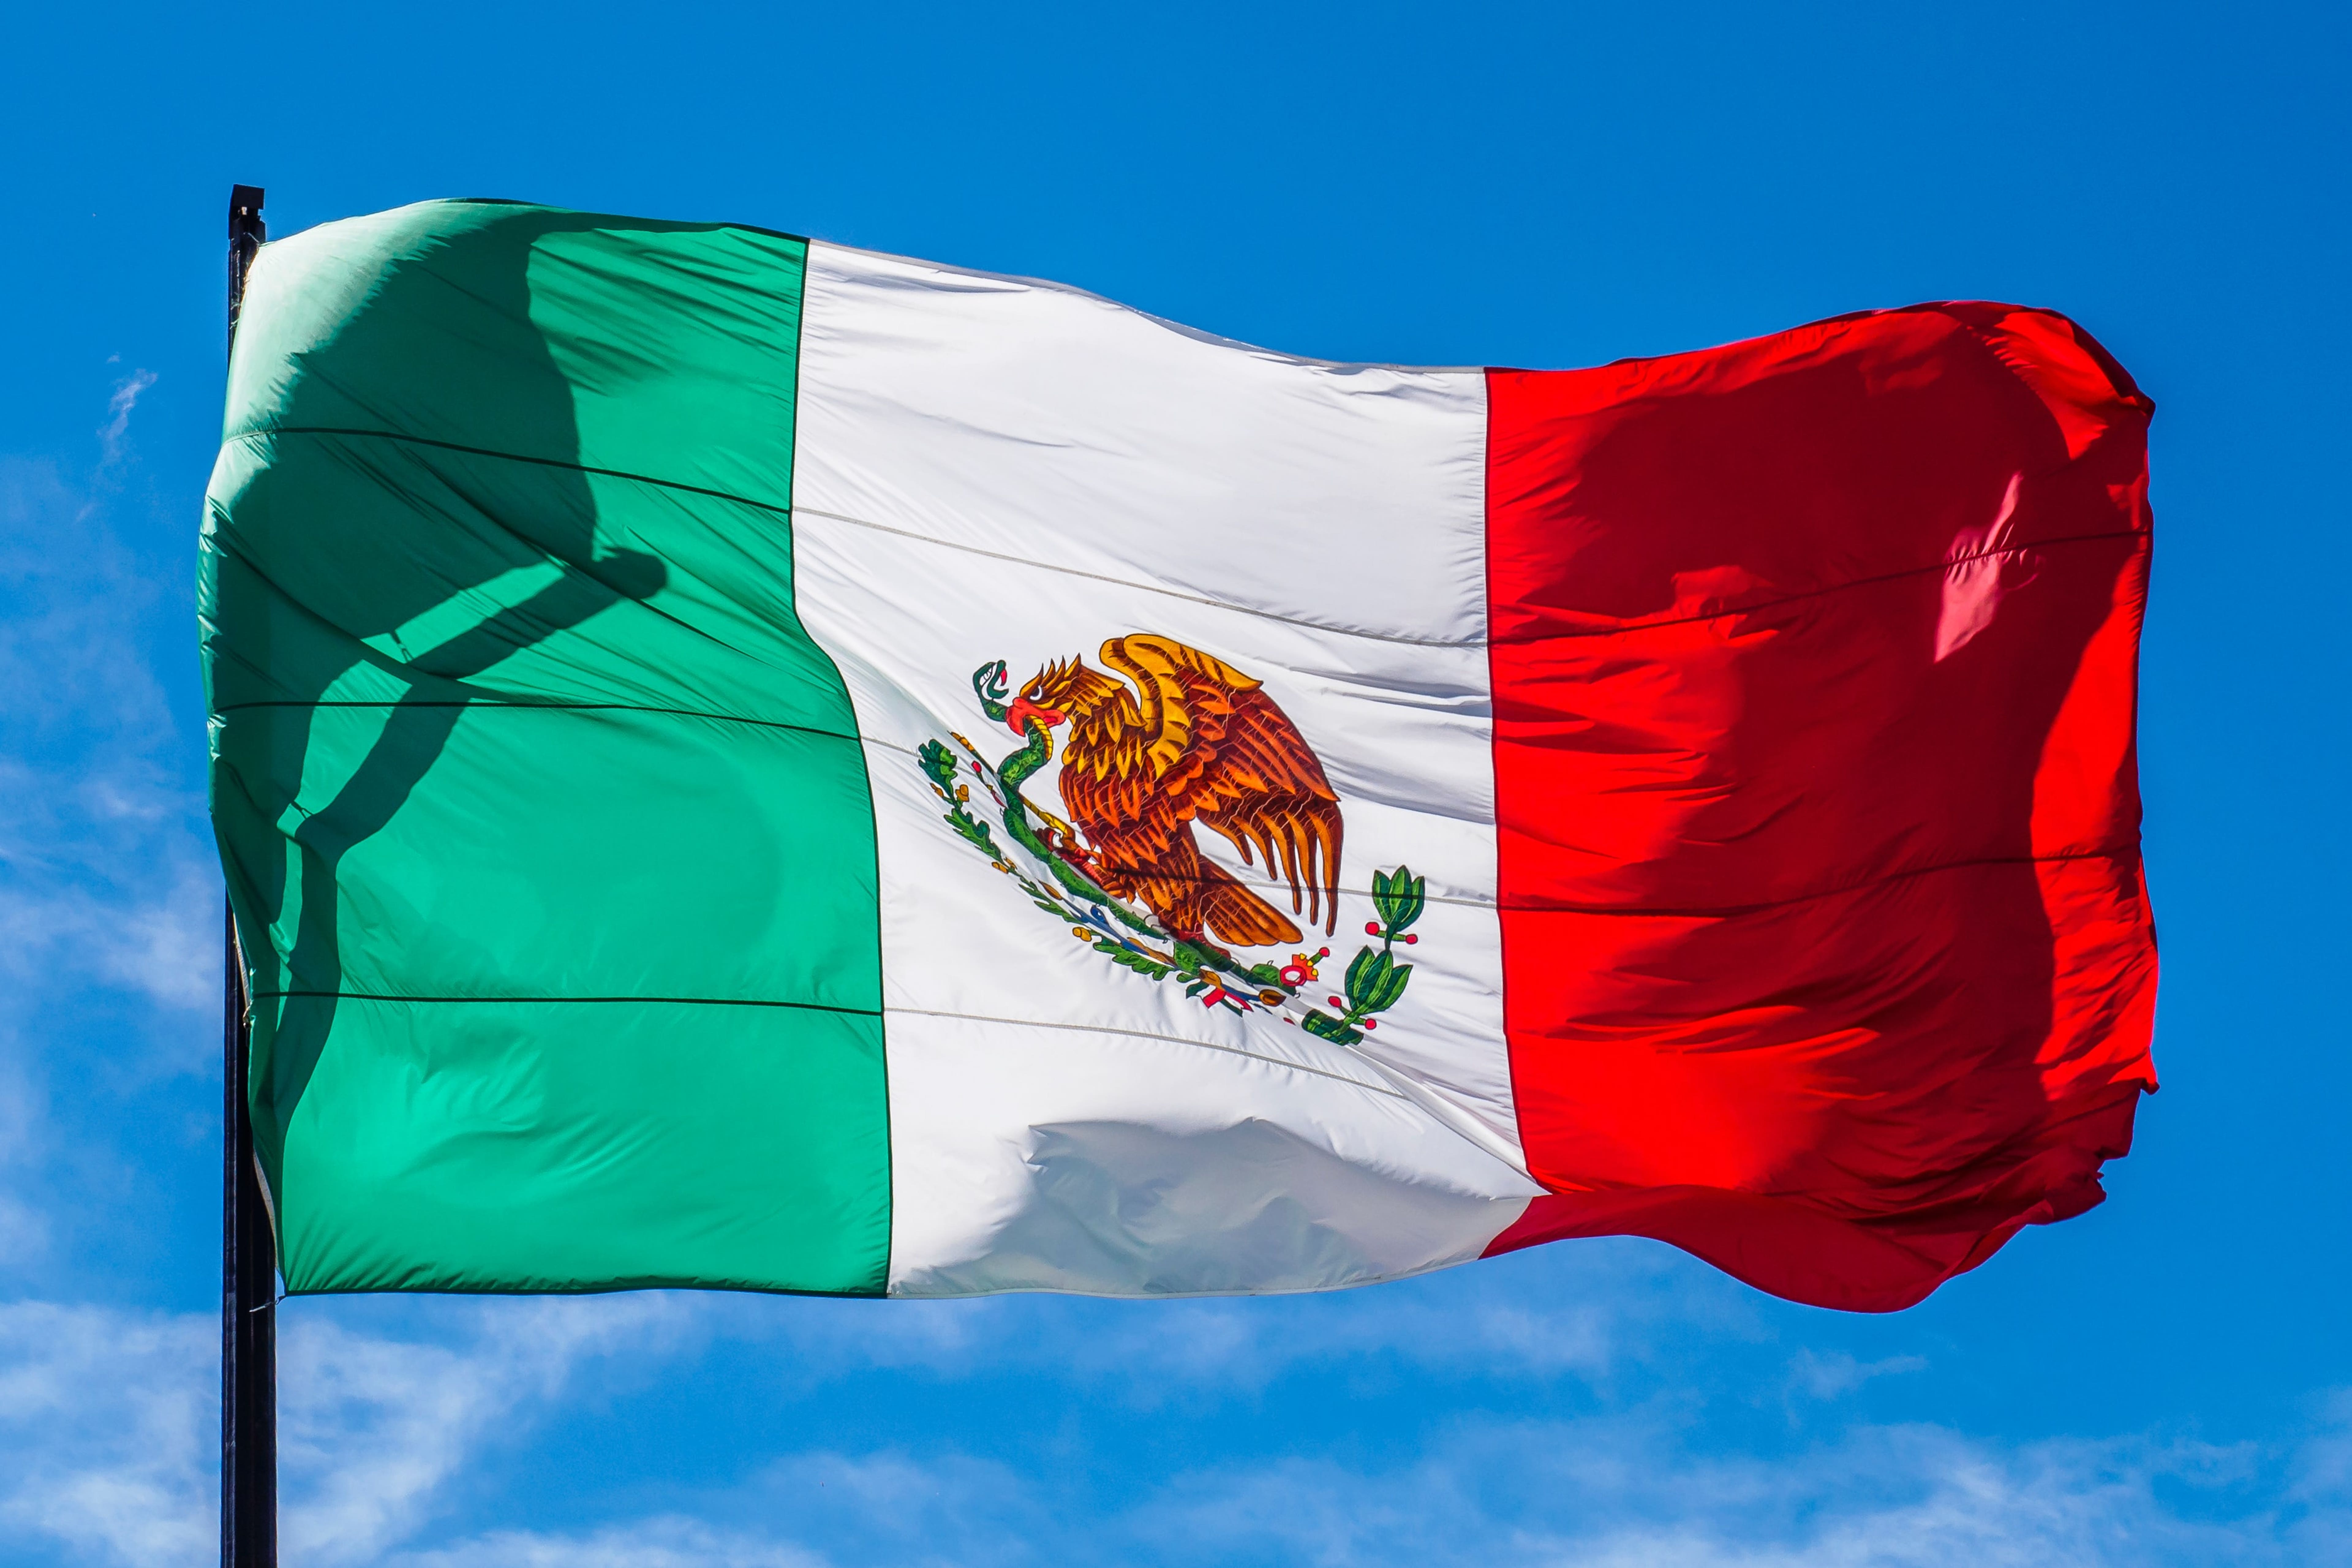 15 ETFs And Stocks With Exposure To Mexico